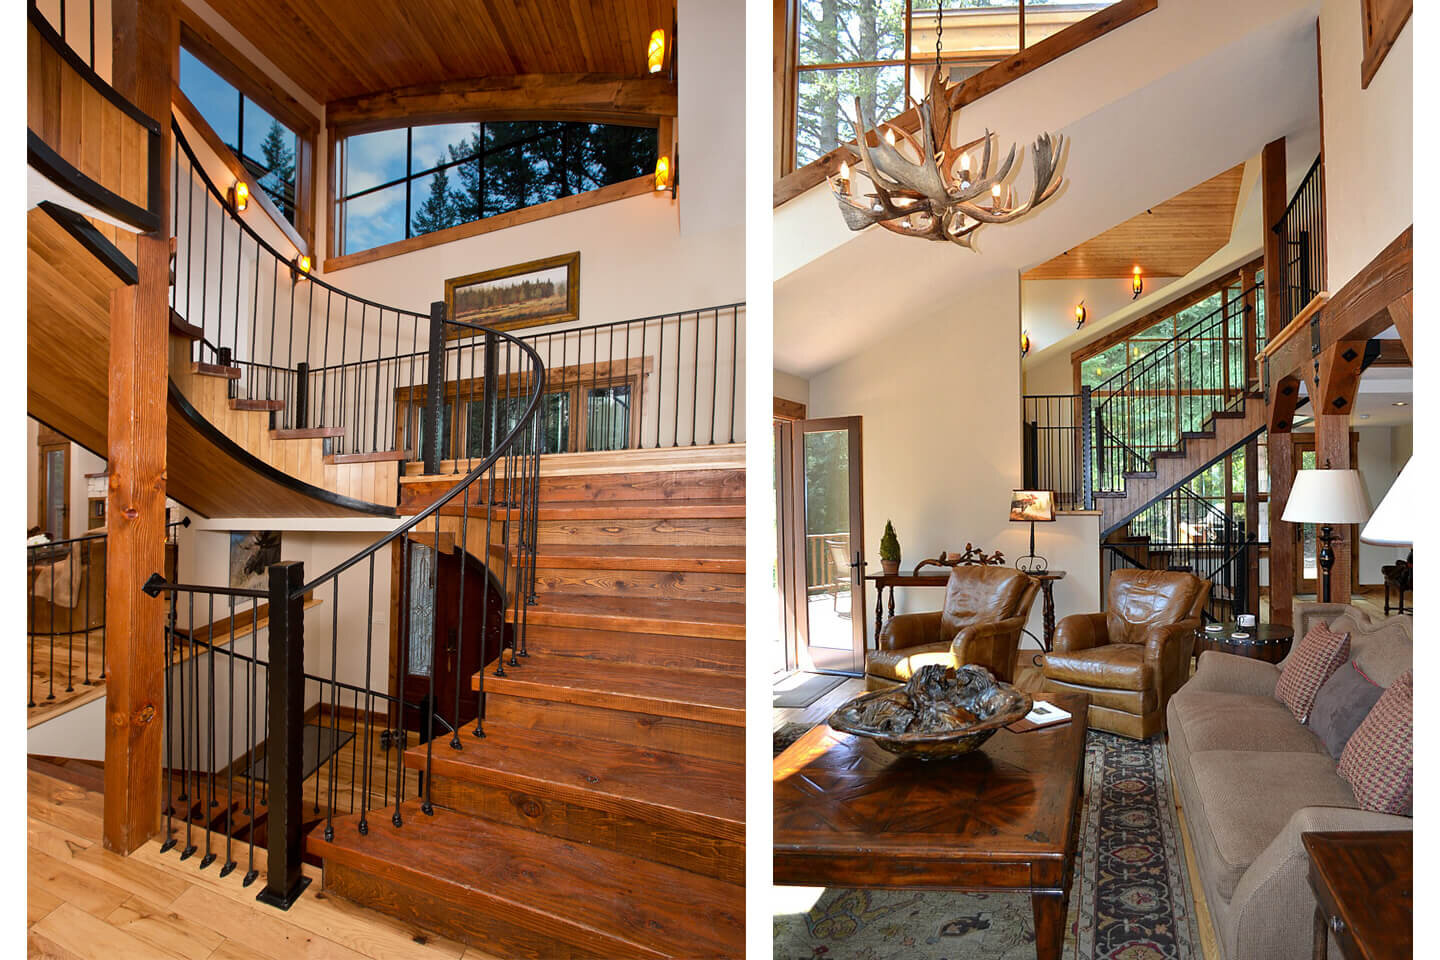 Spiral staircase and living room